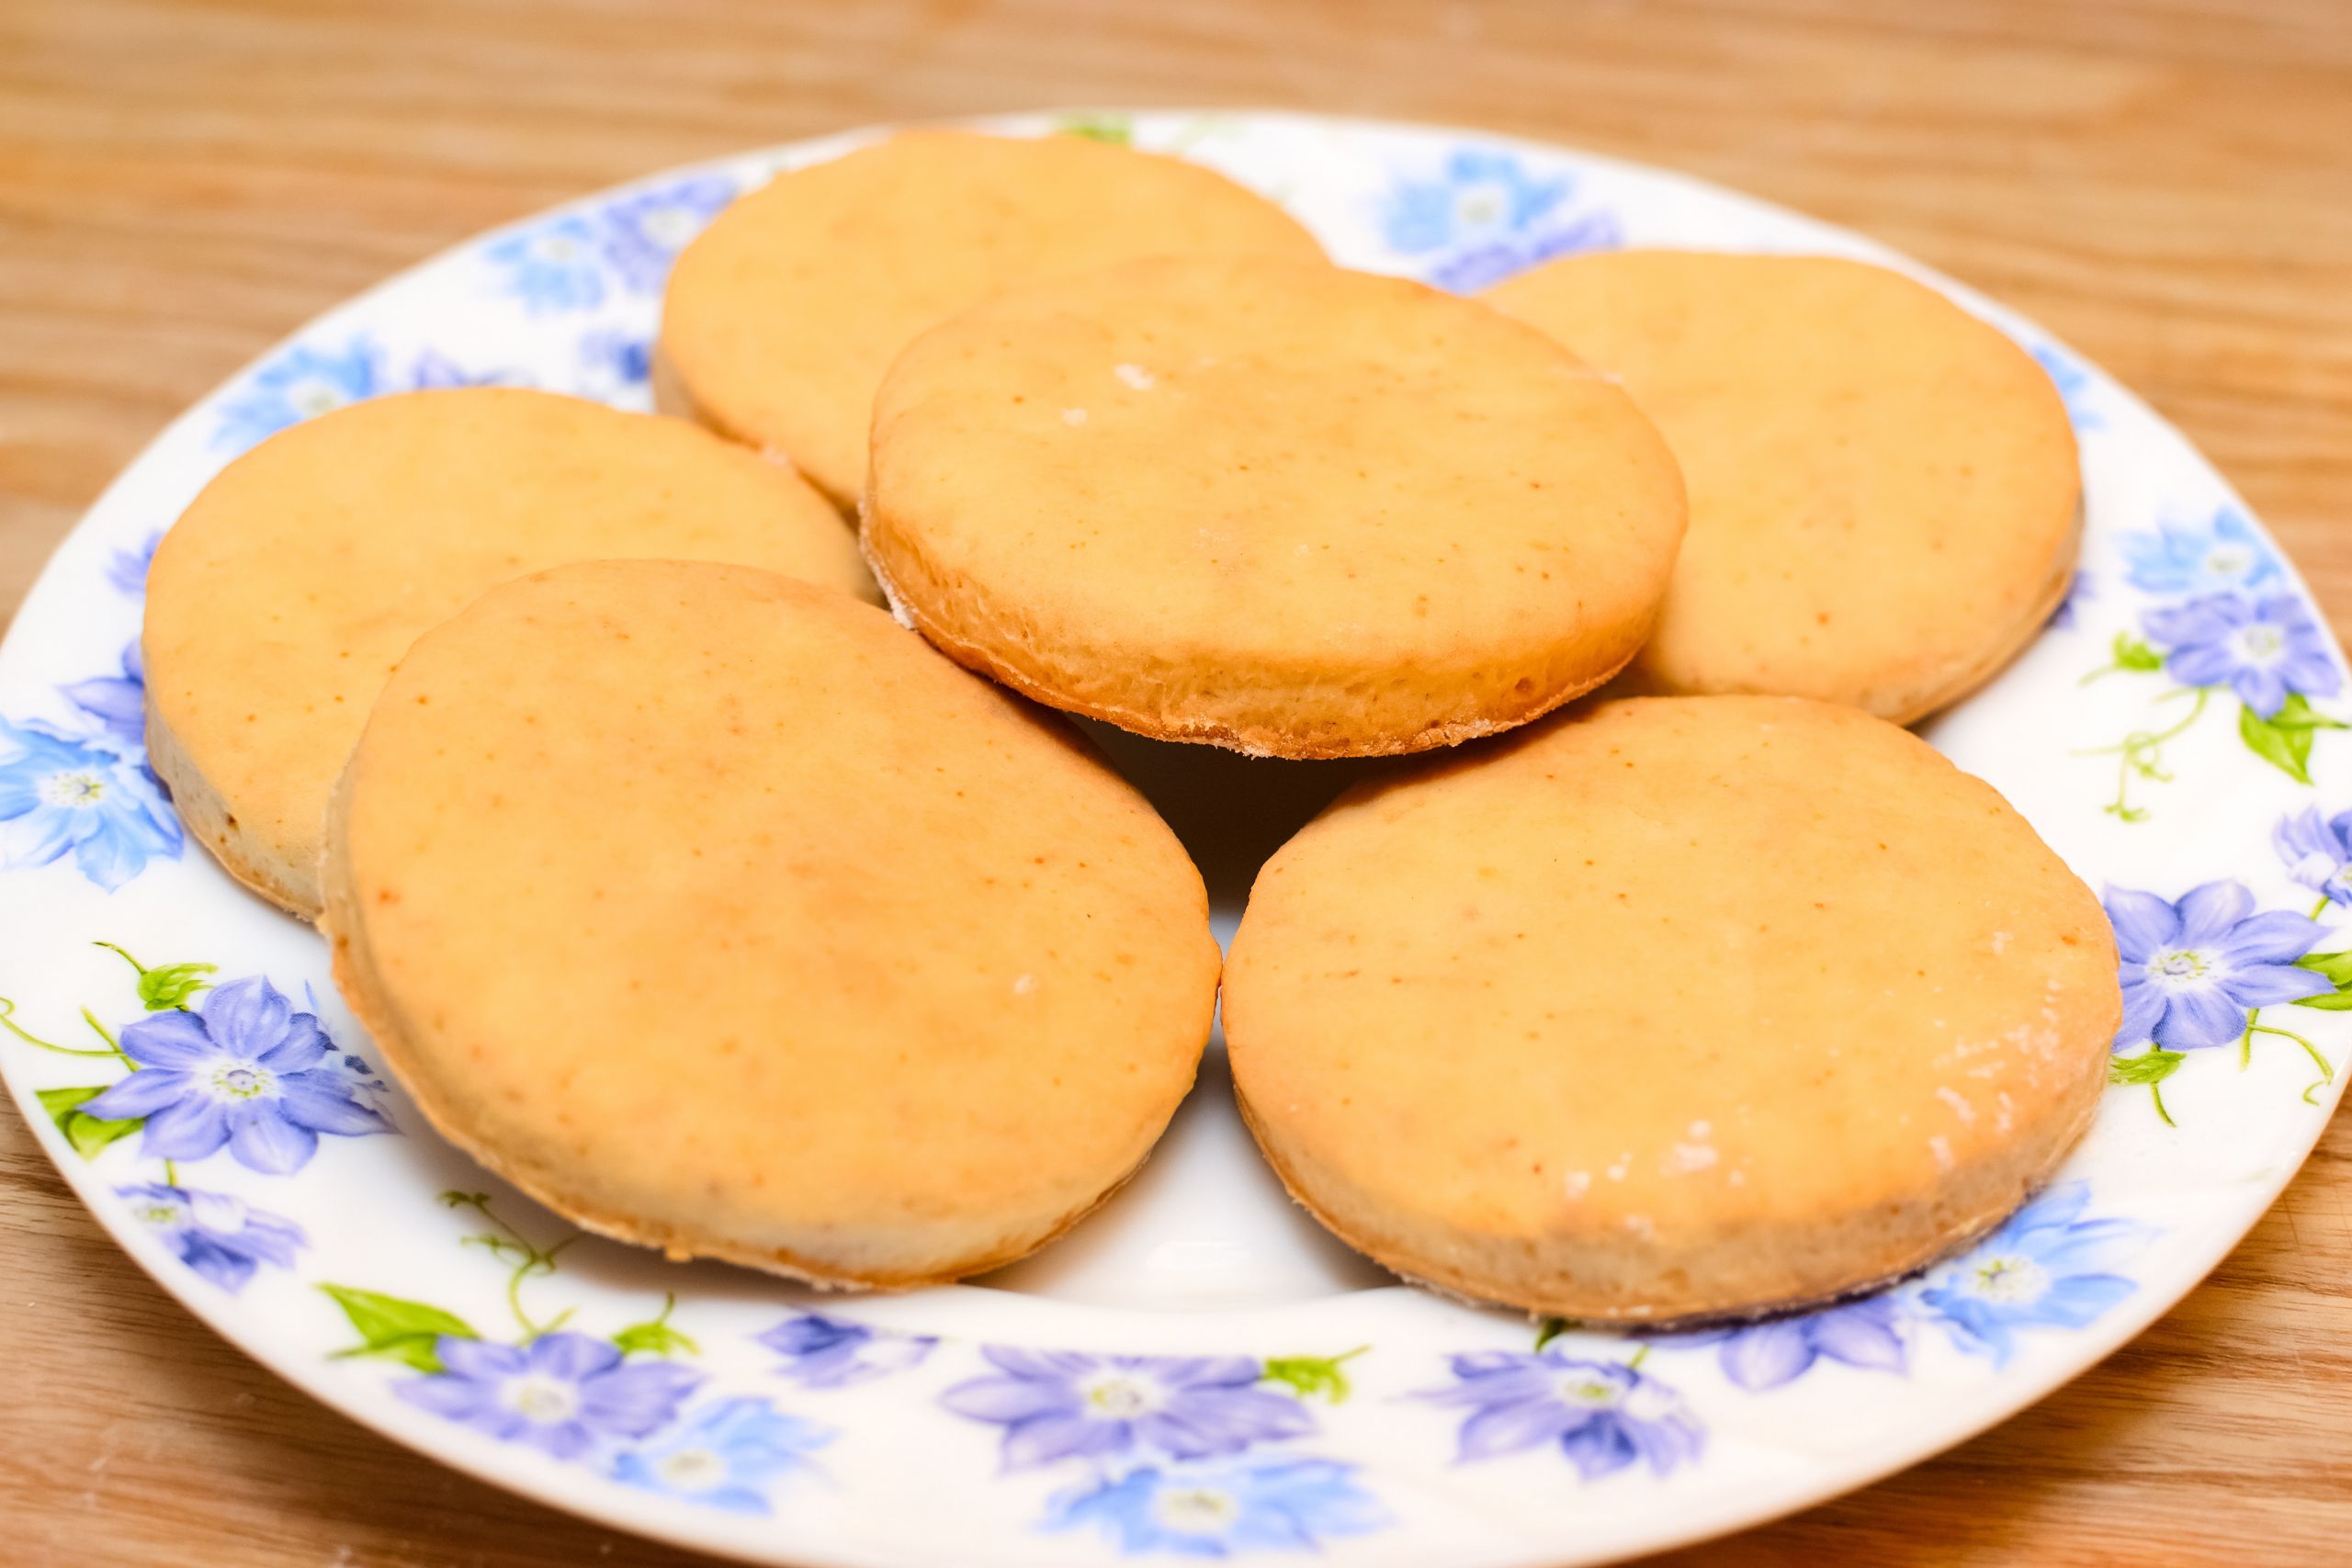 Baking soda Biscuit Recipe Awesome How to Make Baking soda Biscuits 12 Steps with